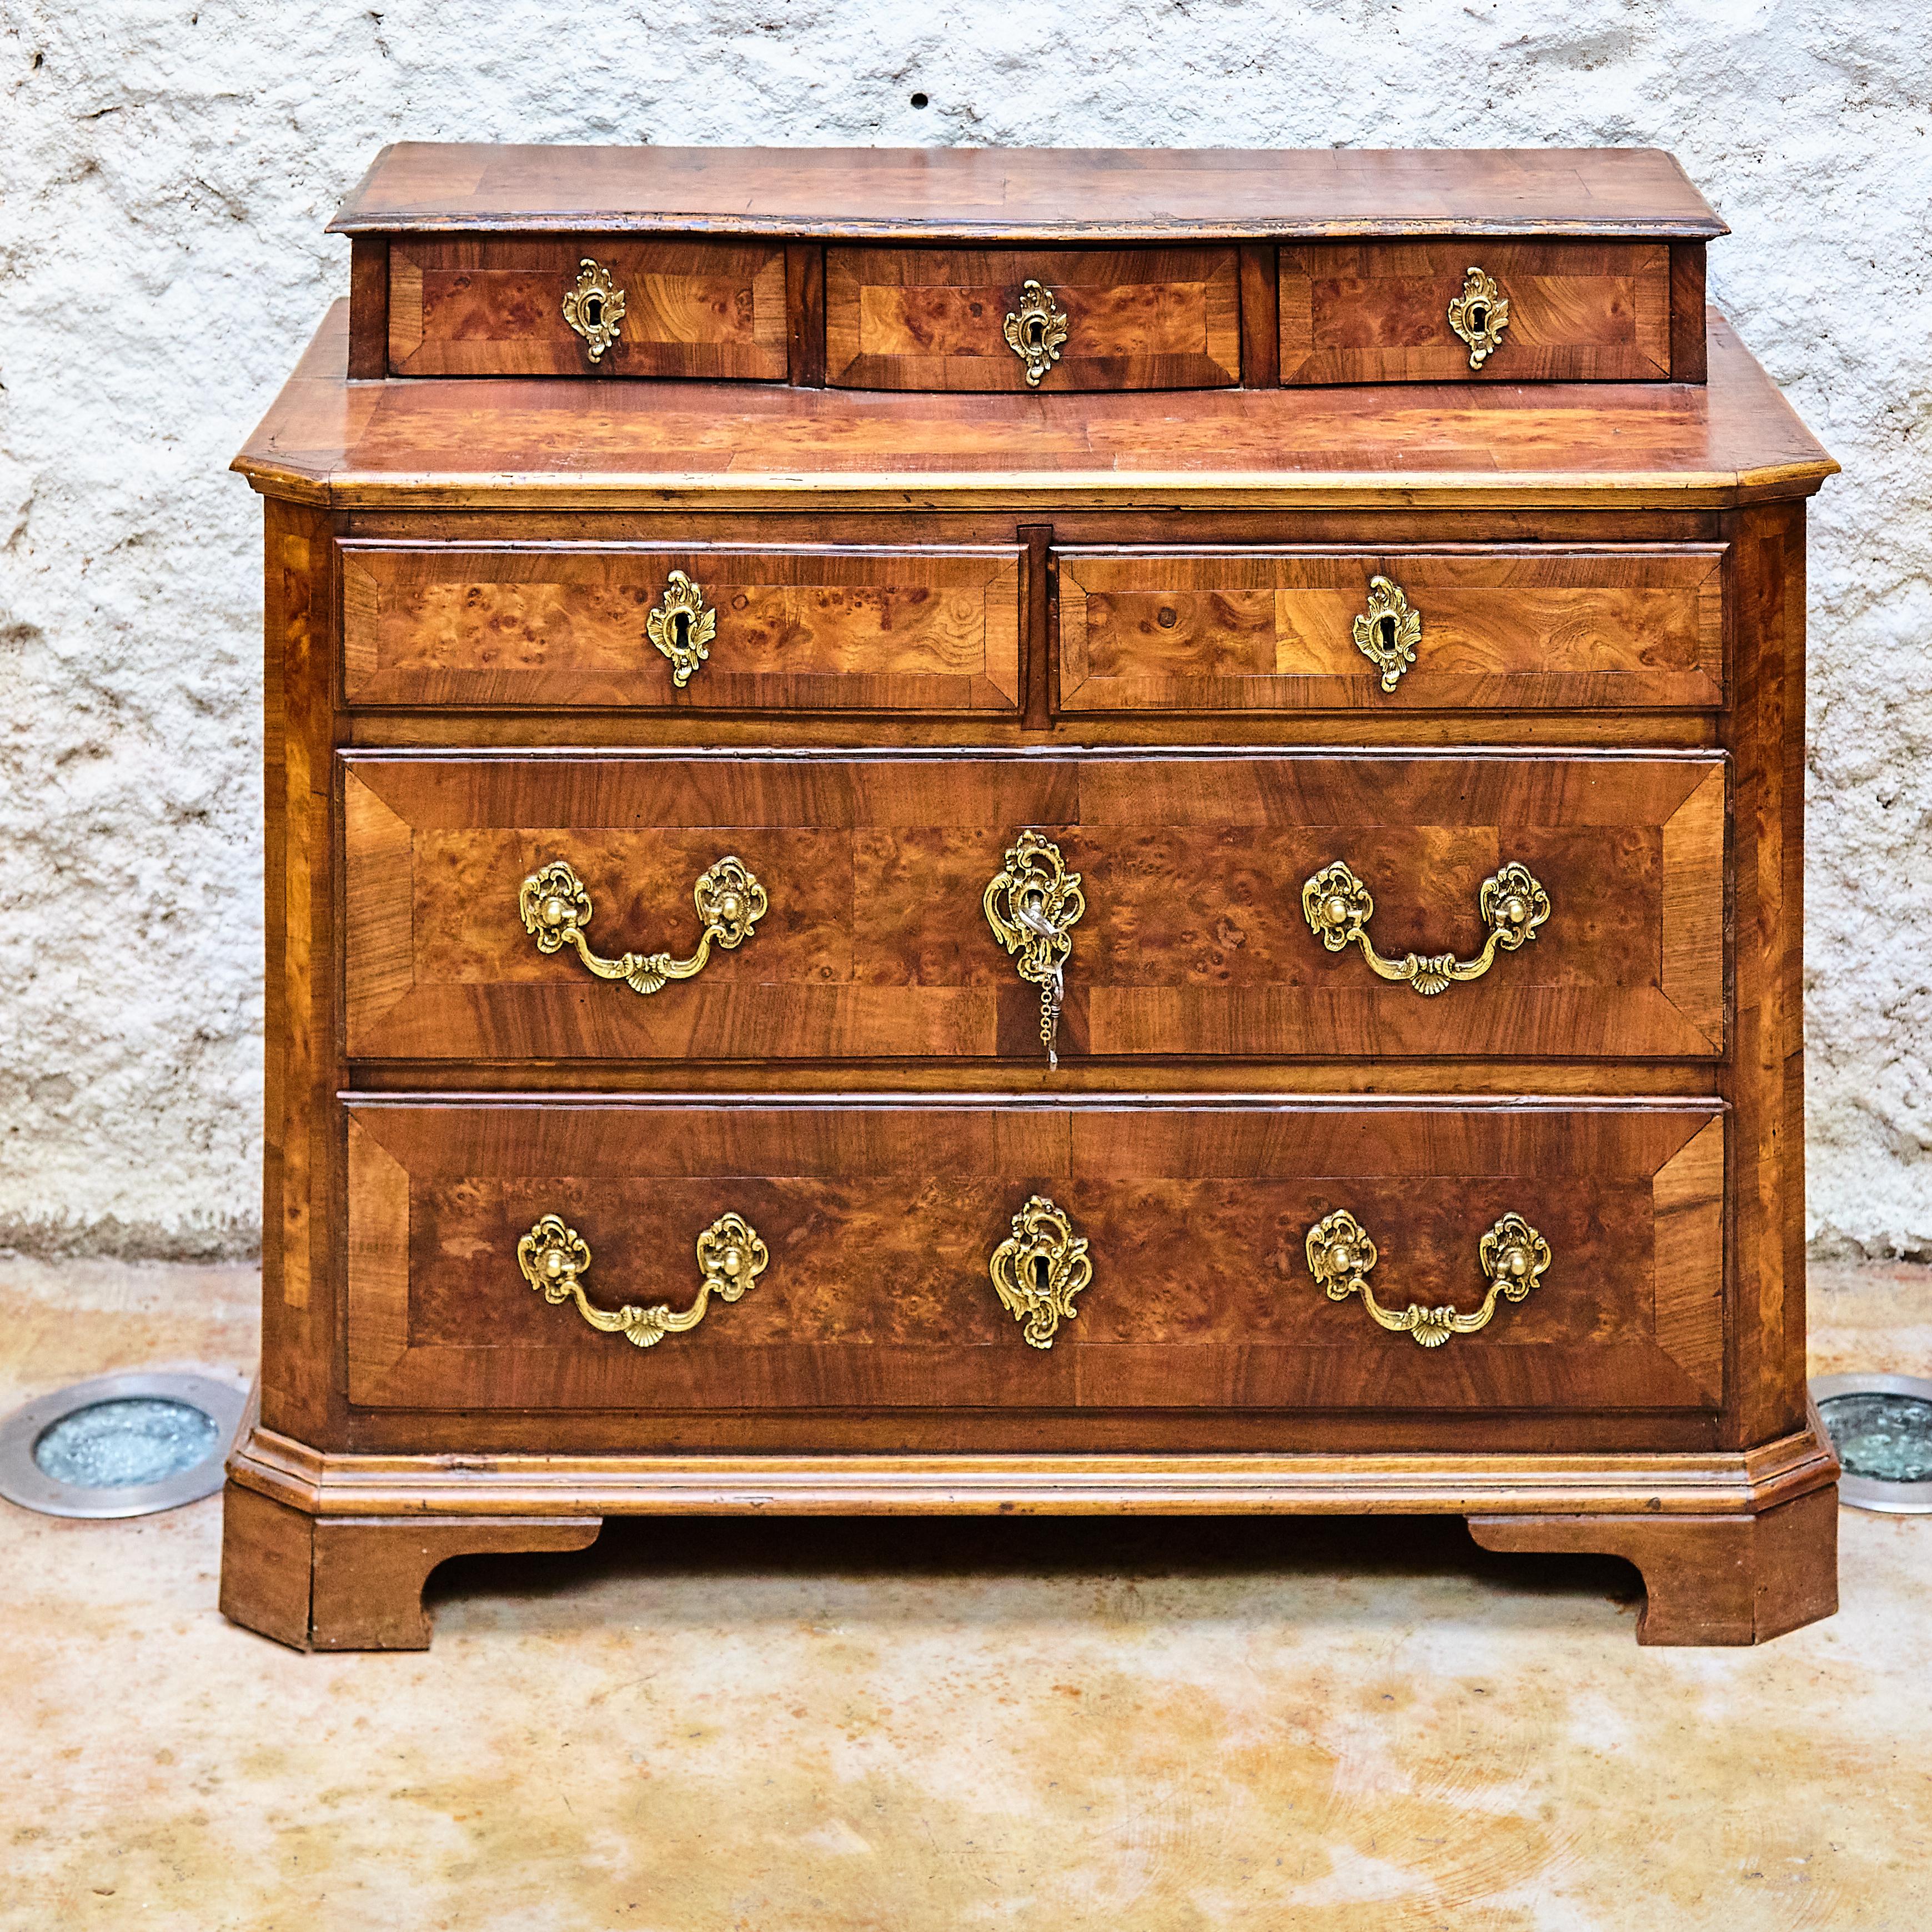 Catalan wood chest with drawers.

Manufactured in Spain, circa 1930

In good original condition, with consistent with age and use, preserving a beautiful patina with some scratches.

Dimensions: 
D 46 cm x W 100 cm x H 82 cm.

Important information